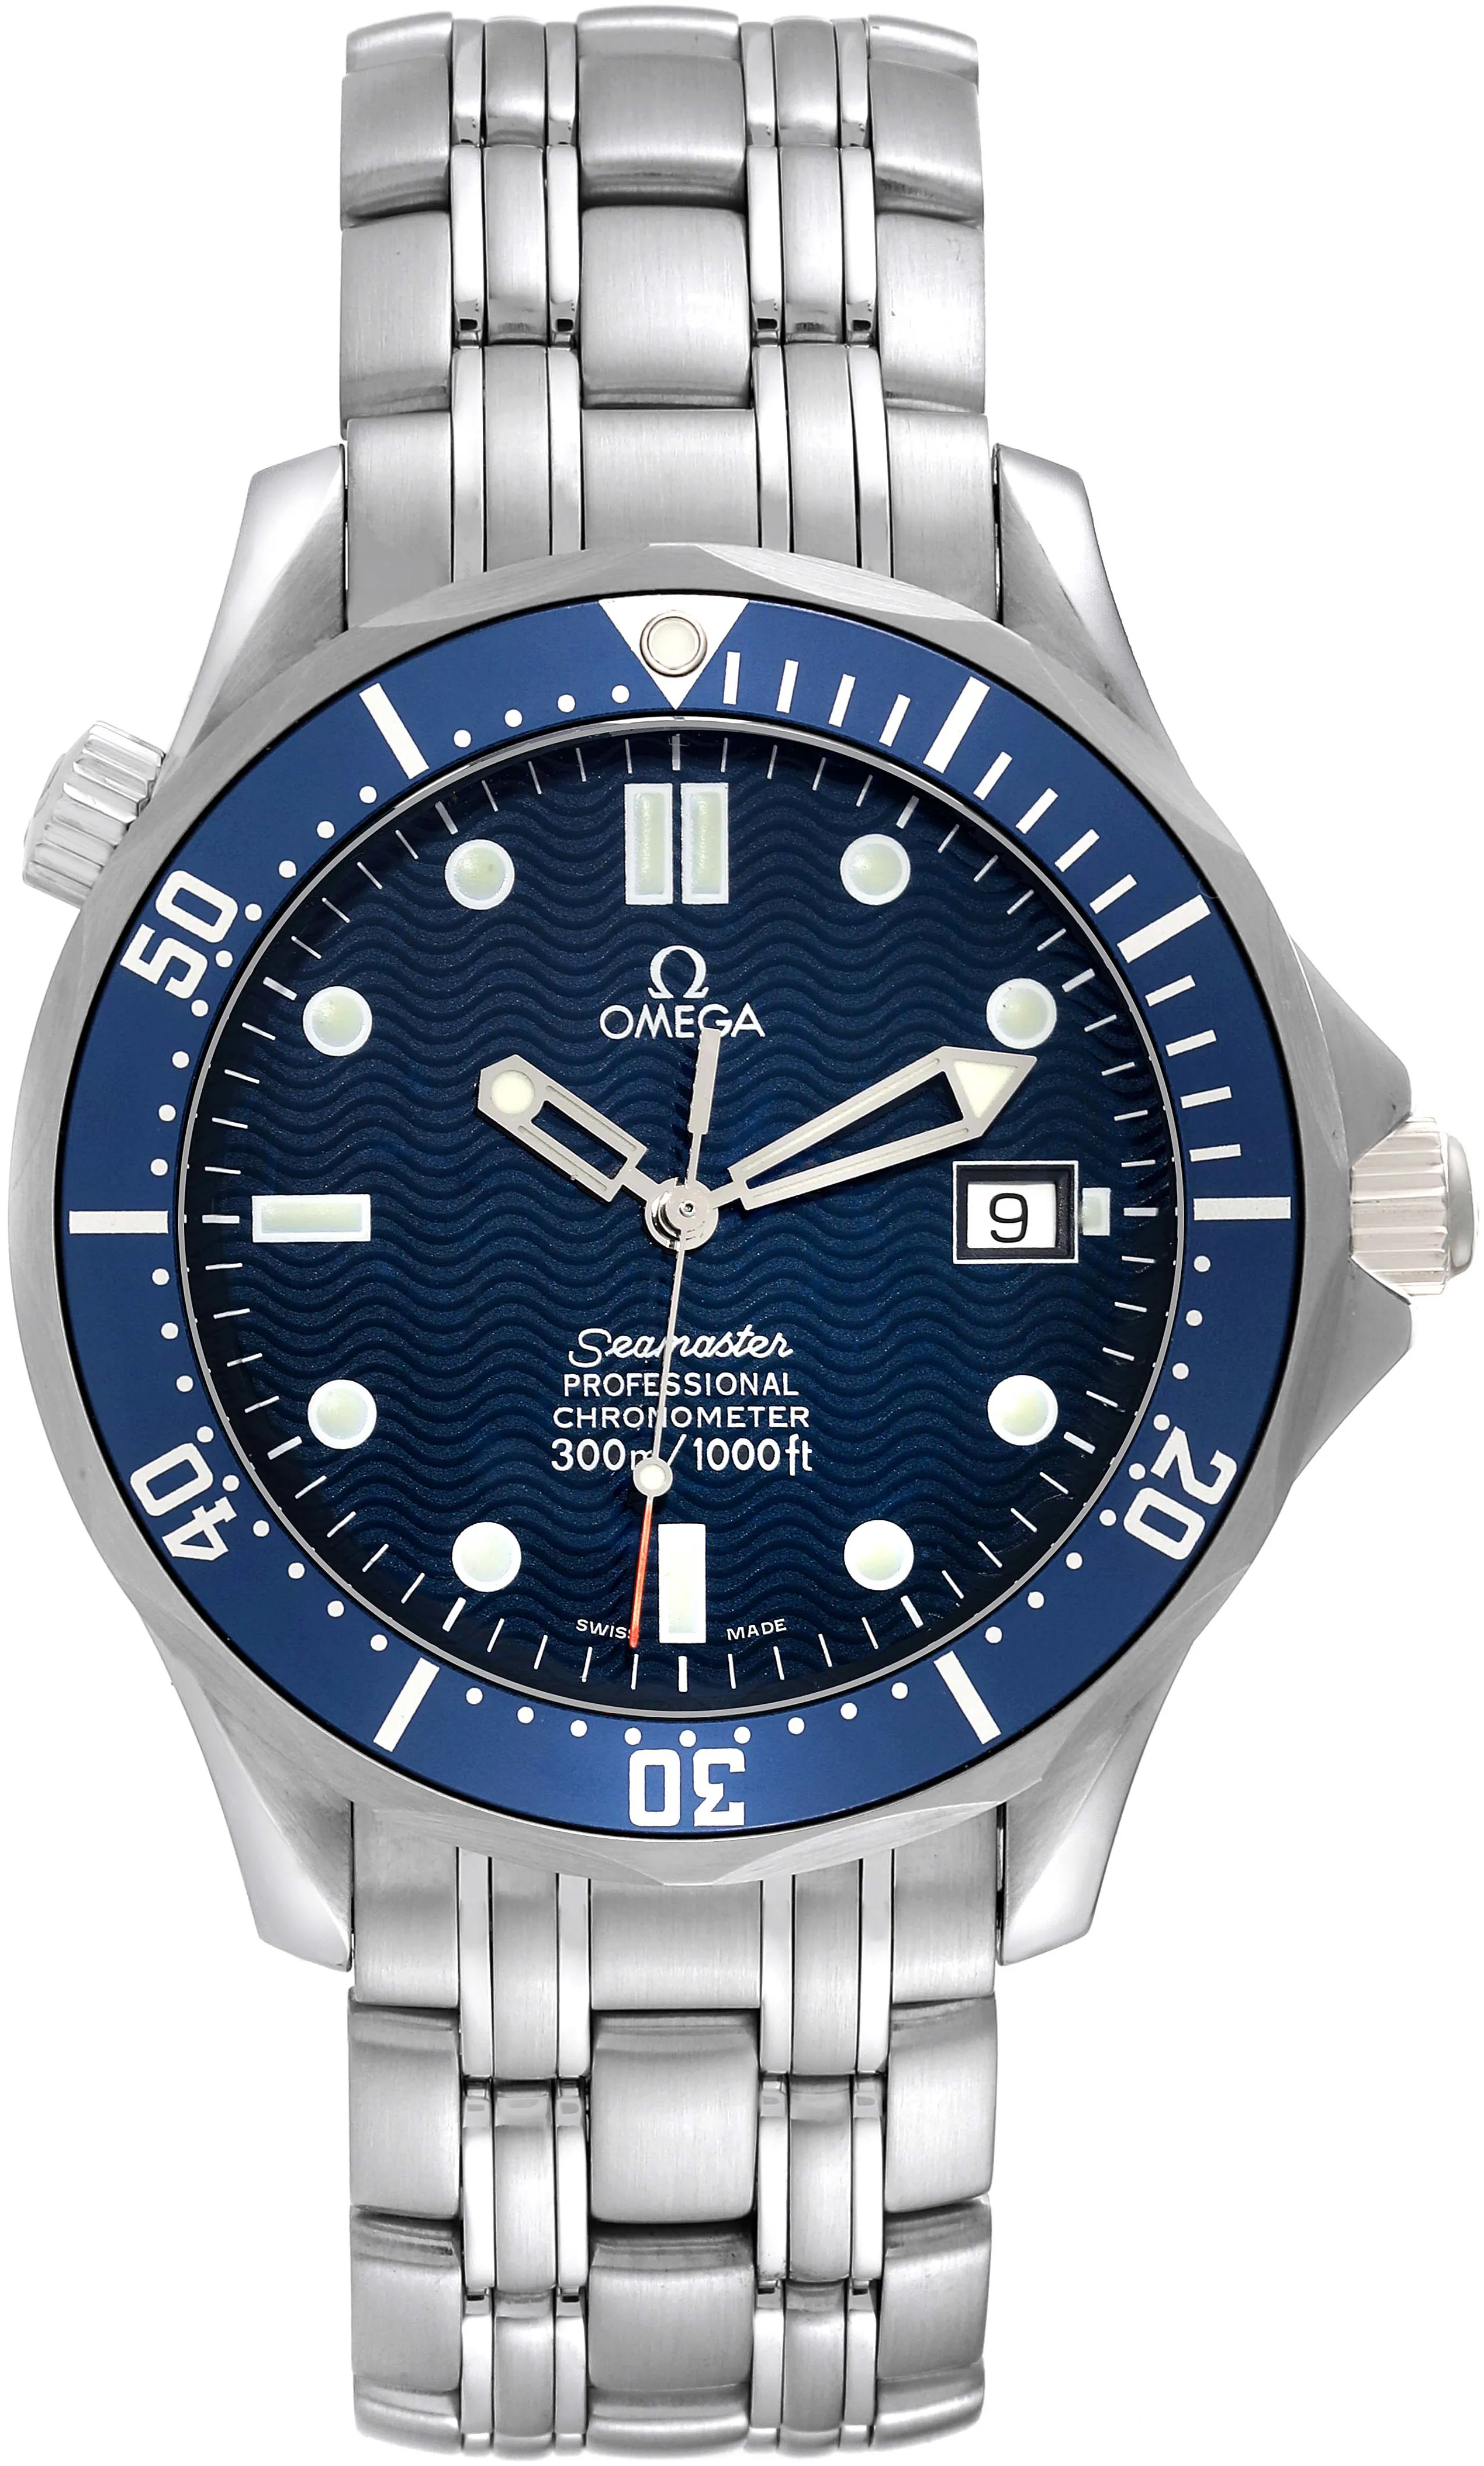 Omega Seamaster Diver 300M 25318000 41mm Stainless steel